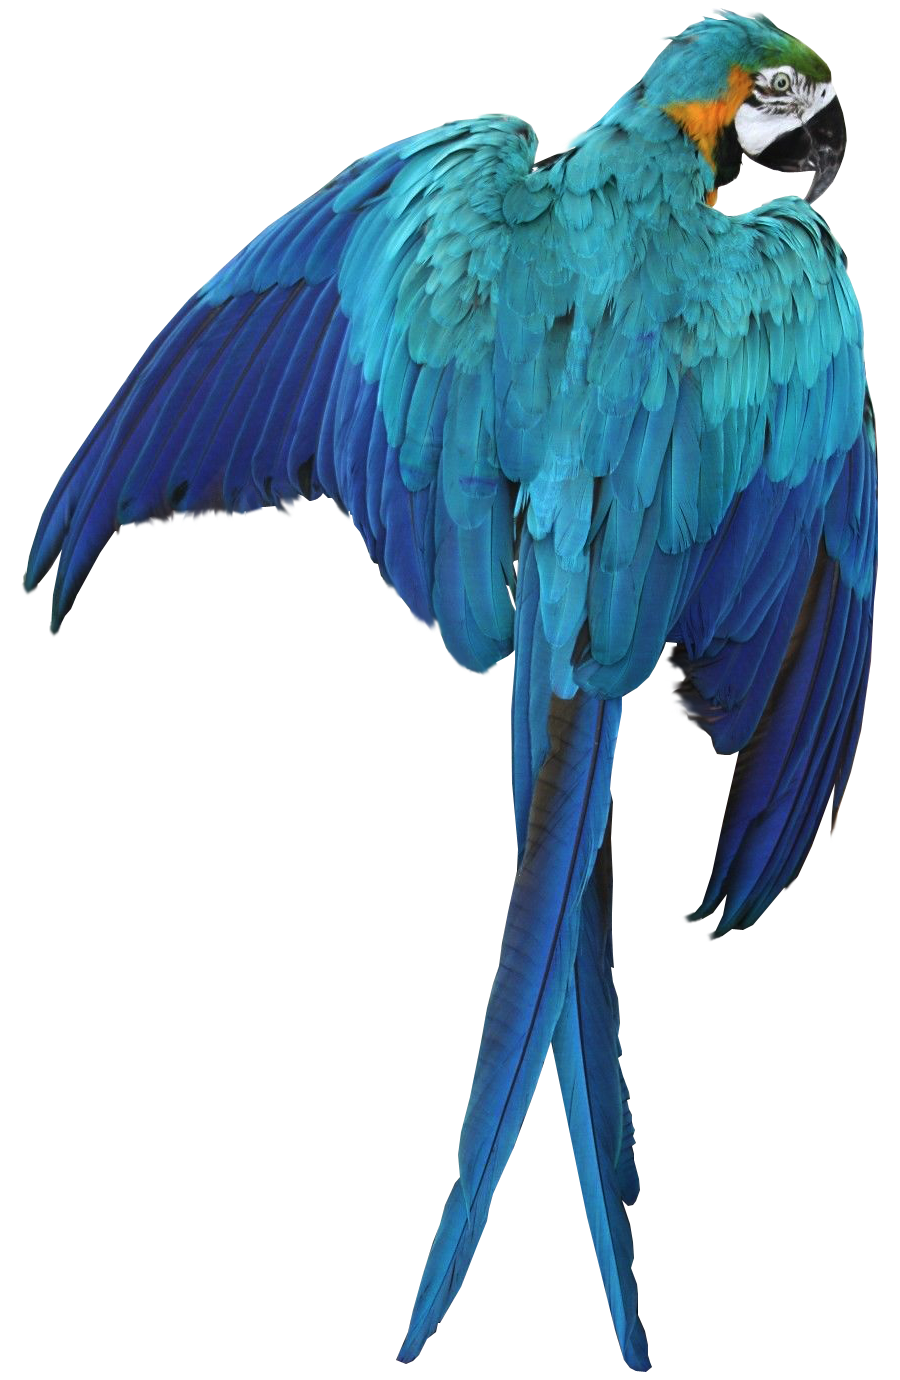 Macaw PNG Pic